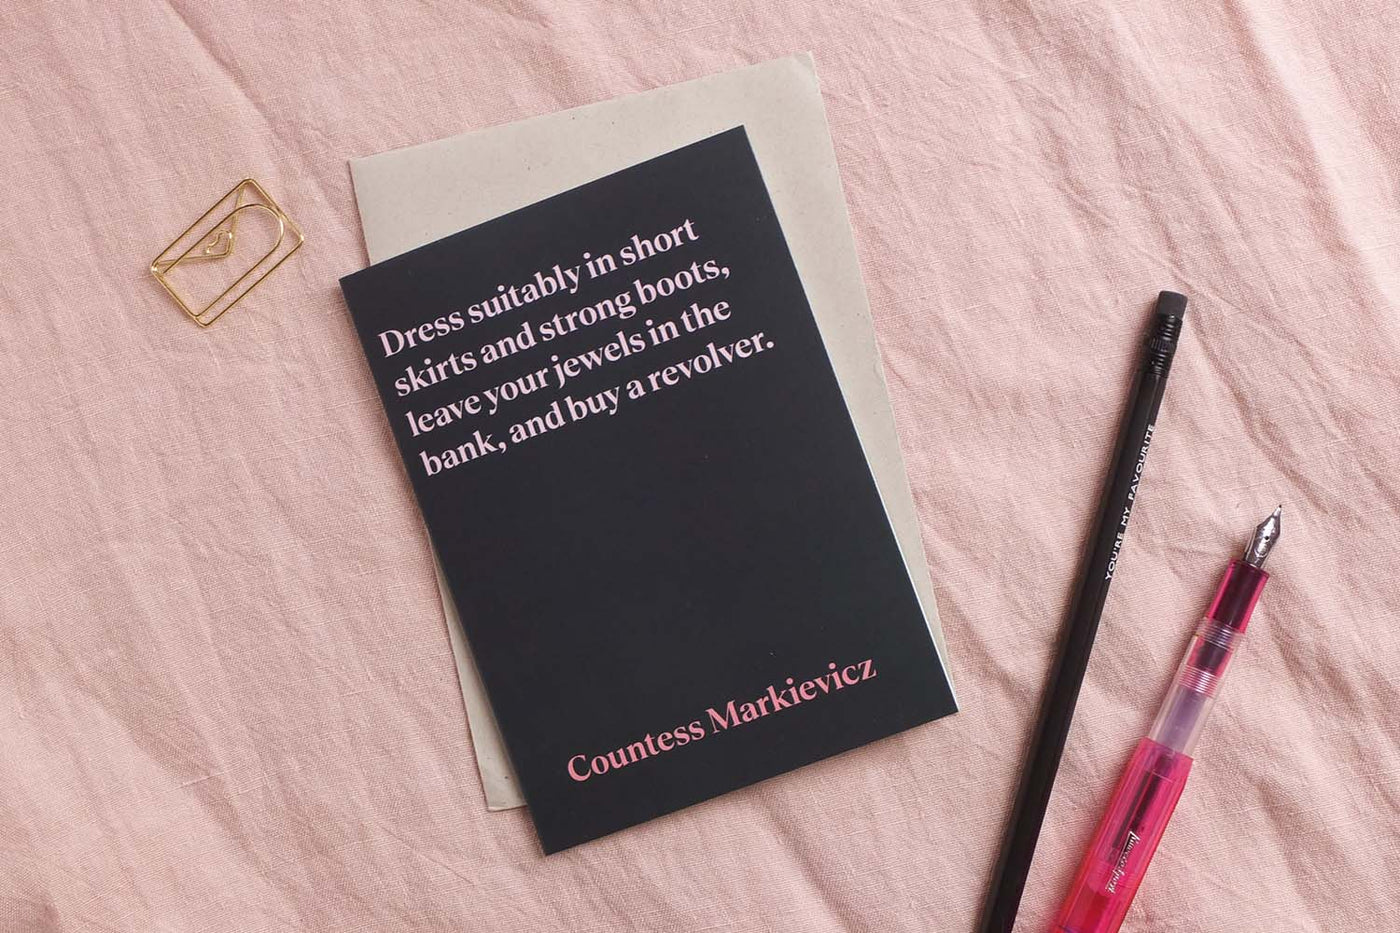 Constance Markievicz Quote Greeting Card Greeting & Note Cards Black & Beech